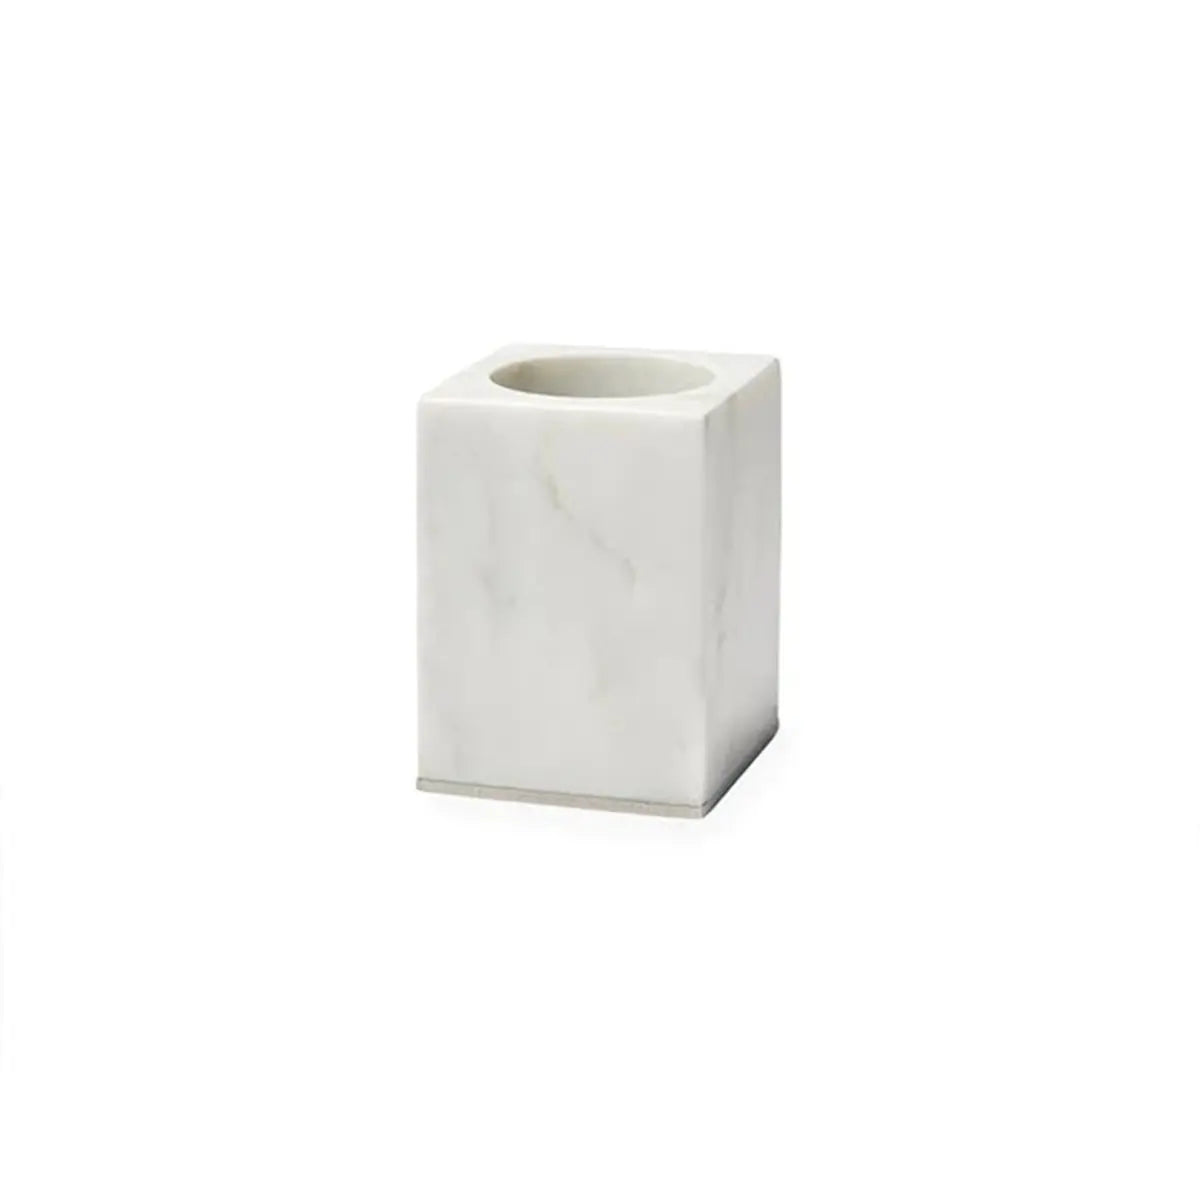 Sferra Pietra Marble Toothbrush Holder in White, Silver